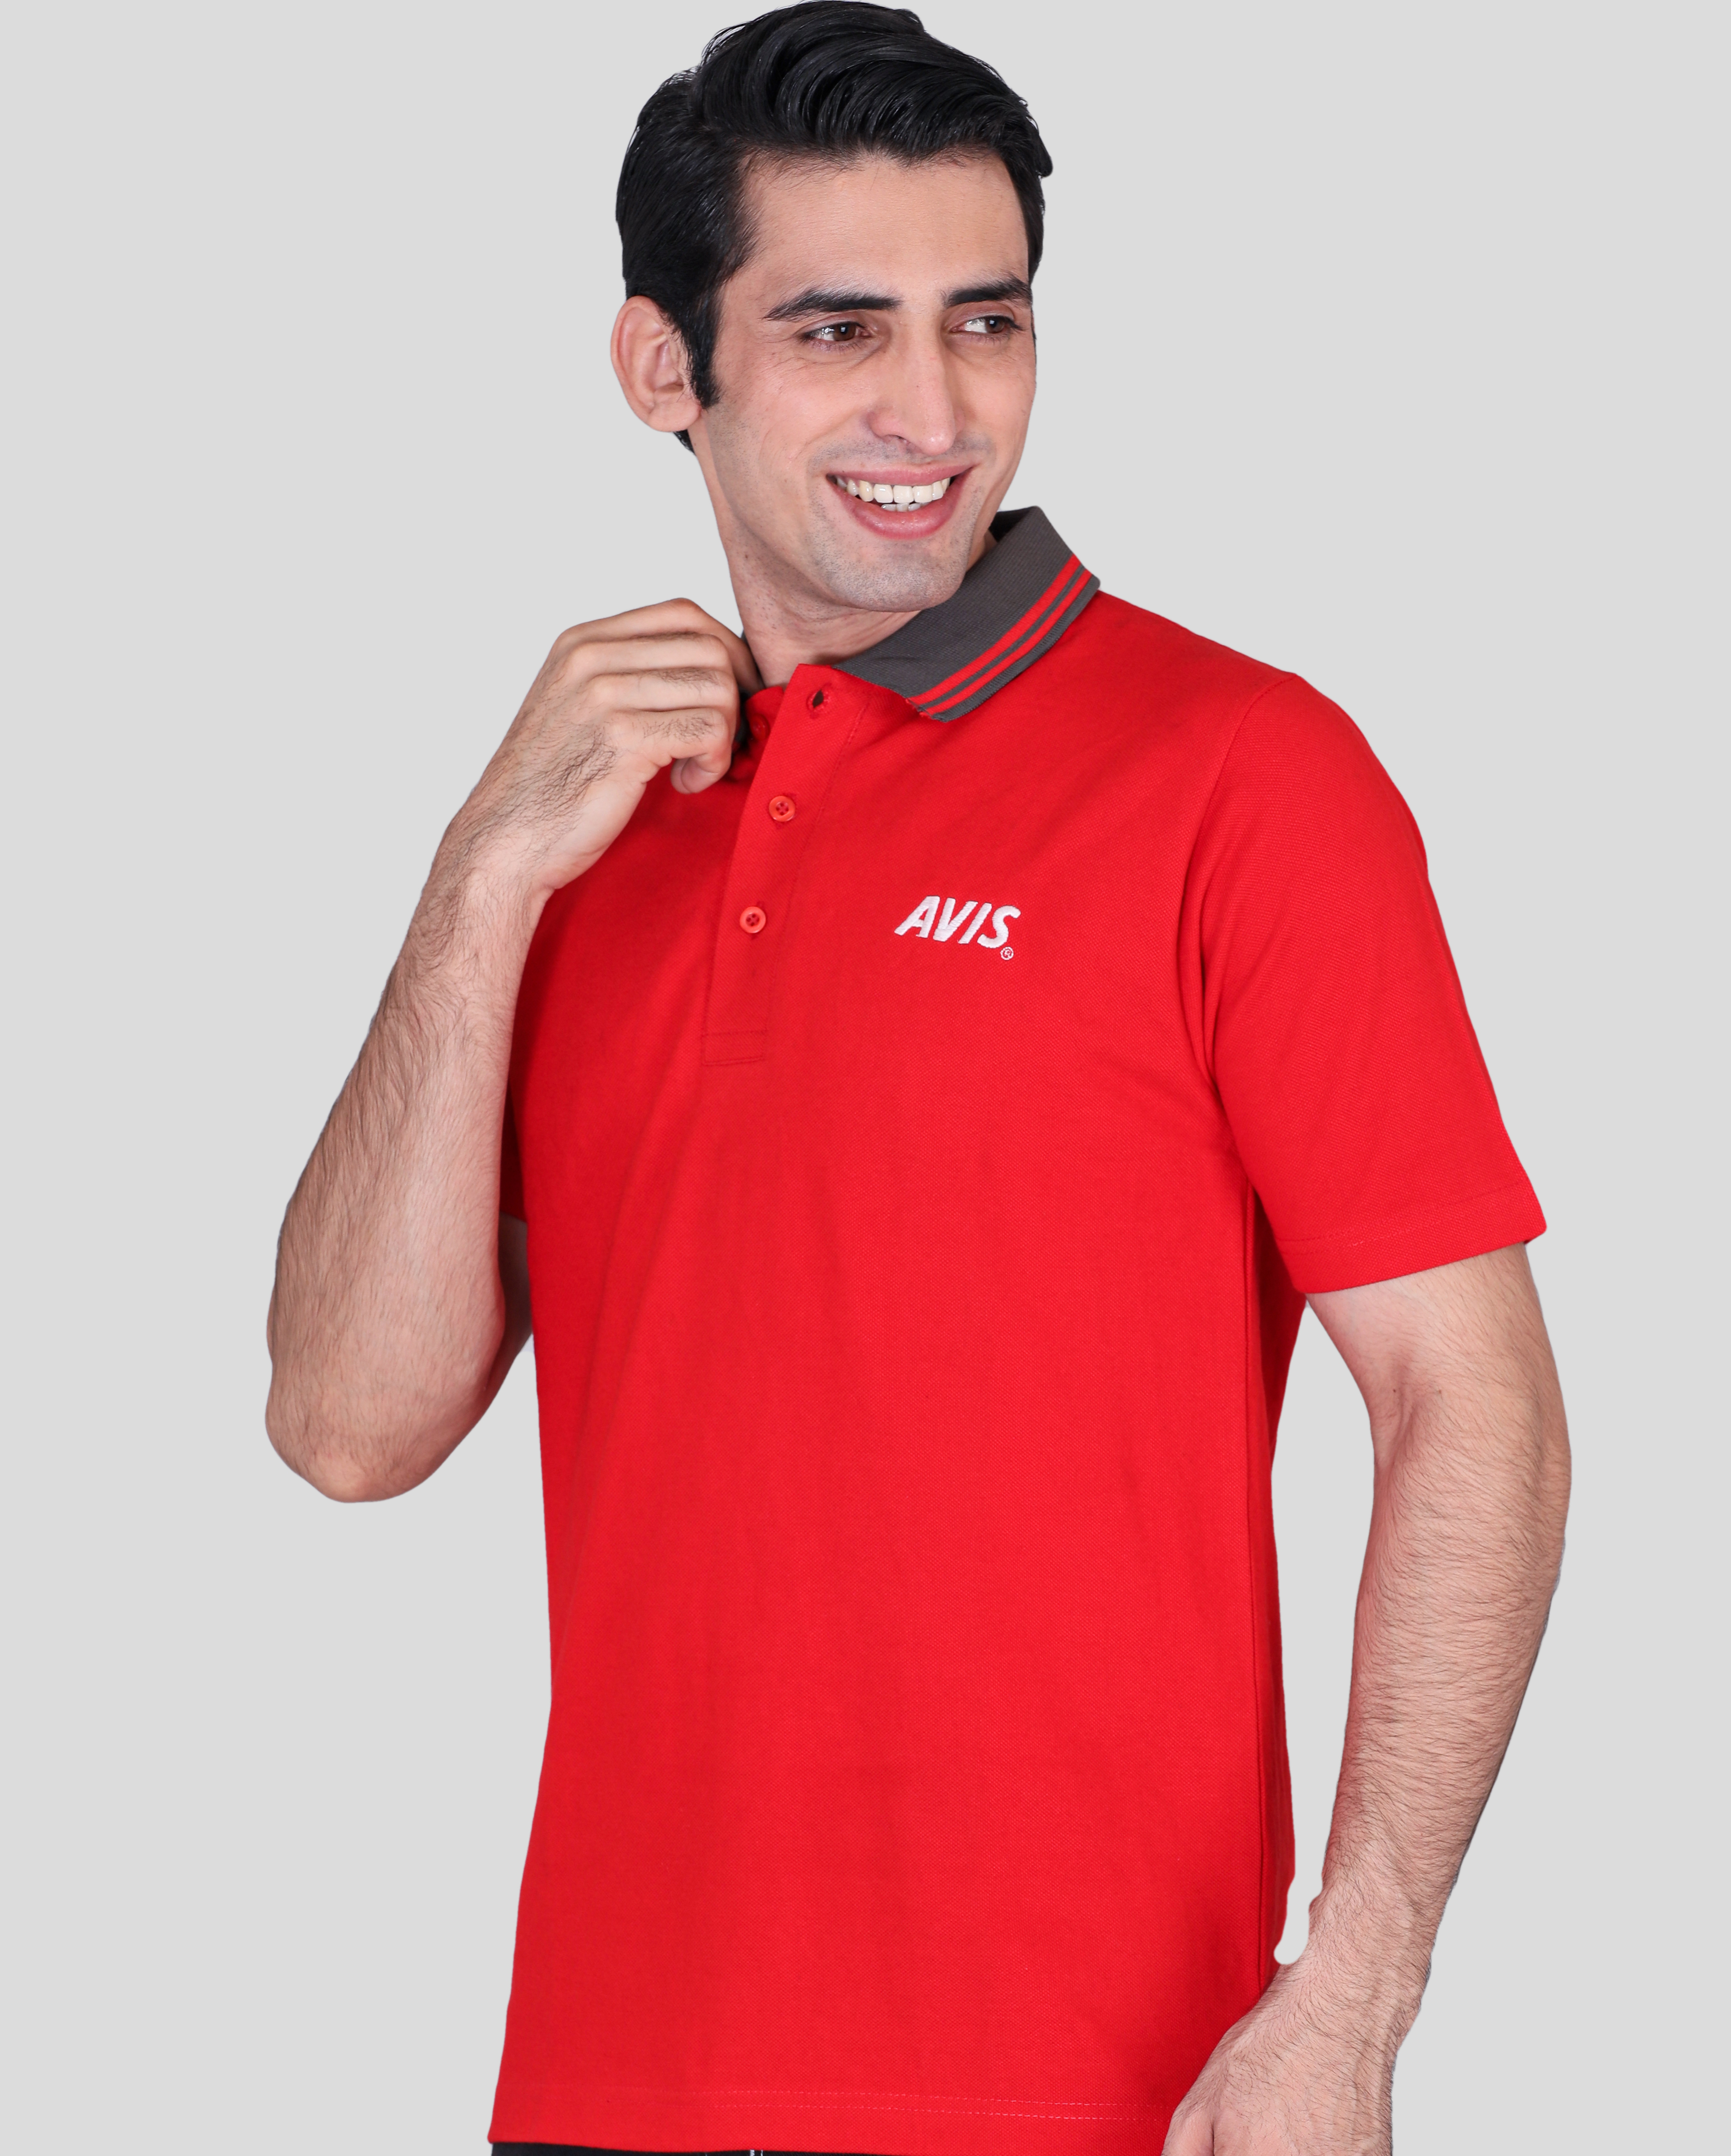 Avis grey collar with red tipping custom polo t-shirts with company logo